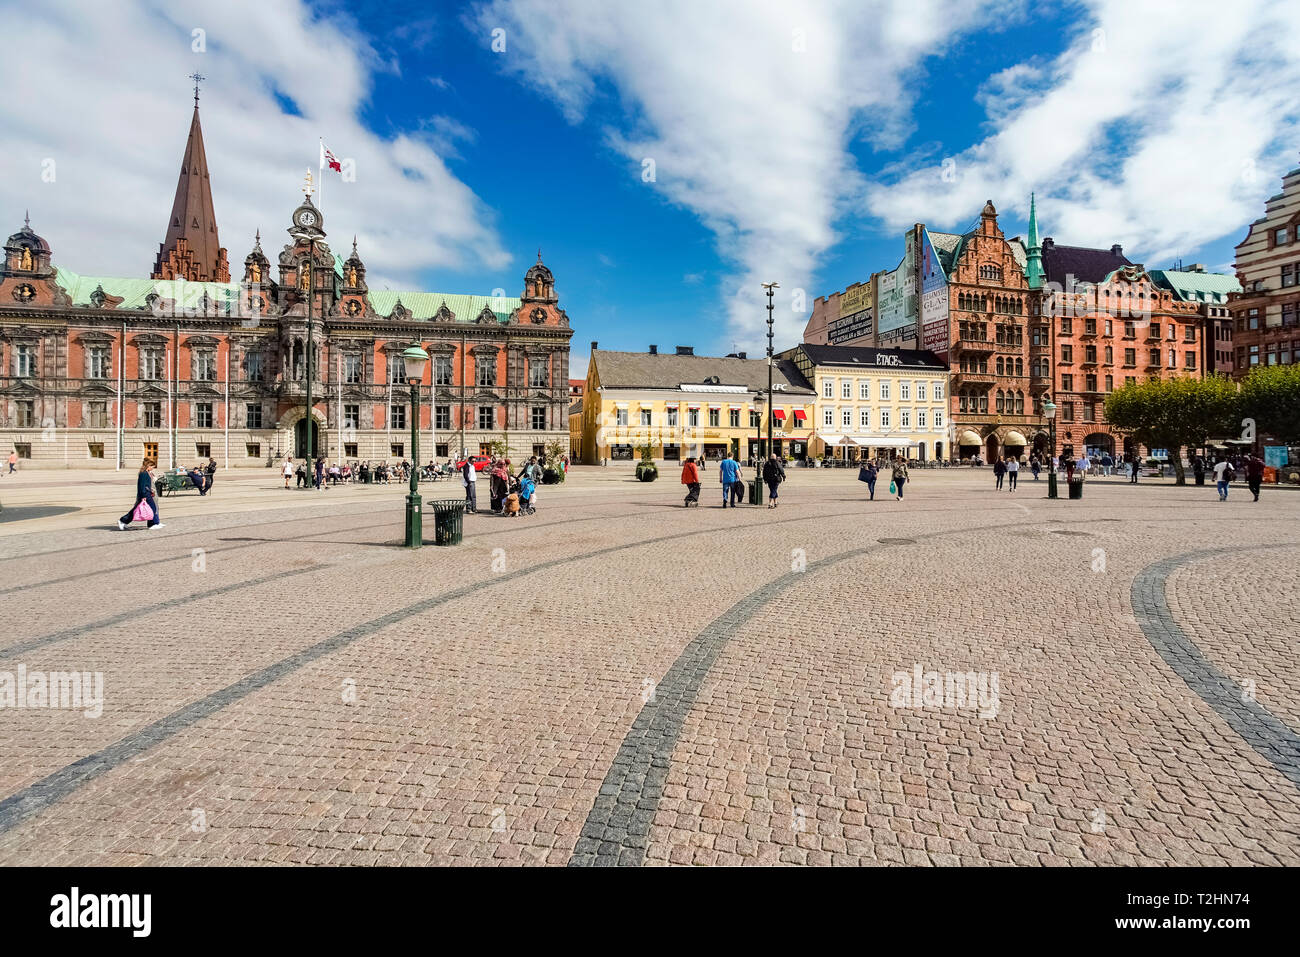 Stortorget, large plaza with the town hall, Malmo, Skane county, Sweden, Europe Stock Photo